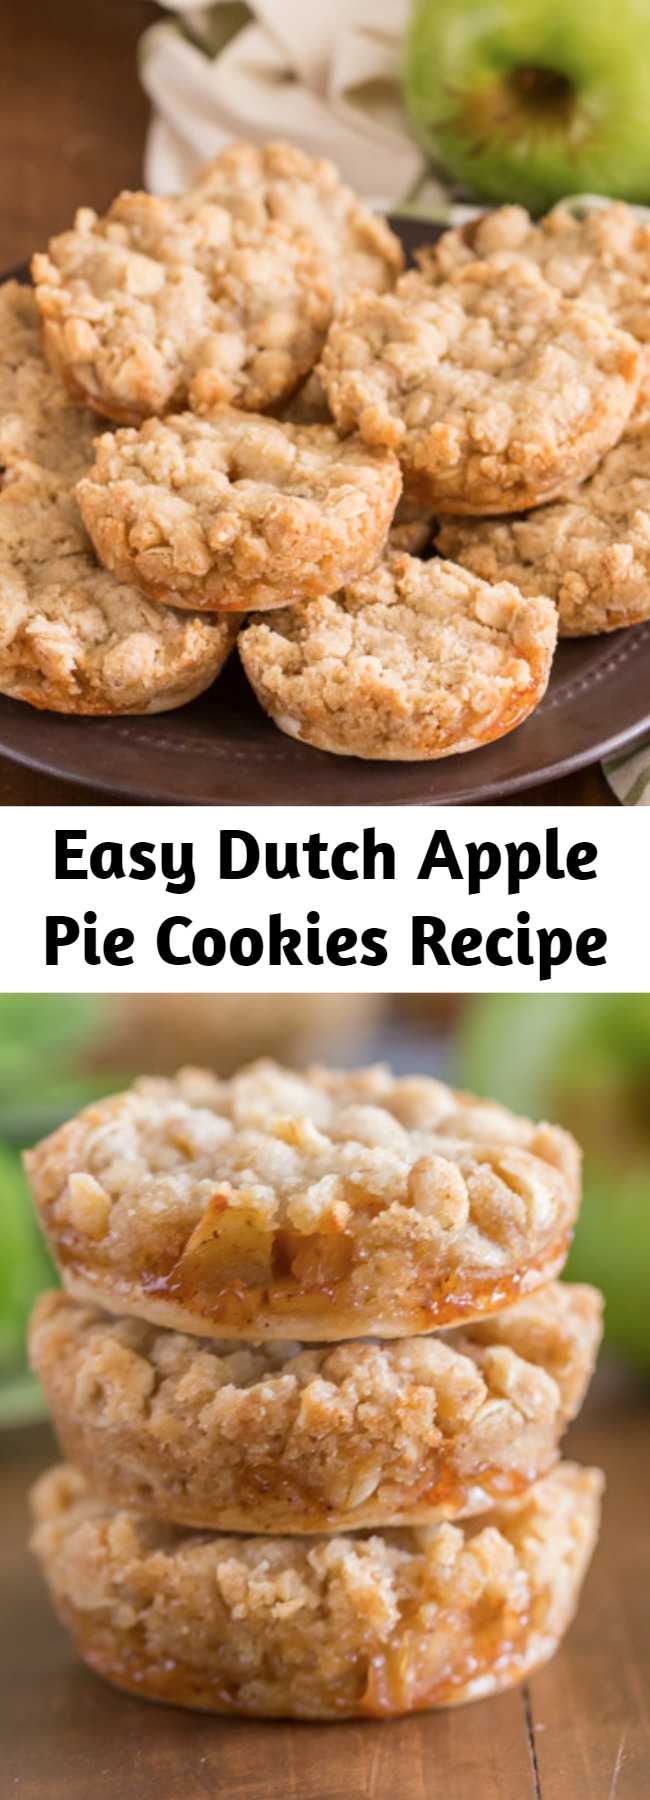 Easy Dutch Apple Pie Cookies Recipe - These are the perfect little three bite apple pie -slash- cookie.  They have a circle of pie crust on the bottom, then a layer of finely diced cinnamon apple filling, with the most delicious, sweet, buttery crumb topping.